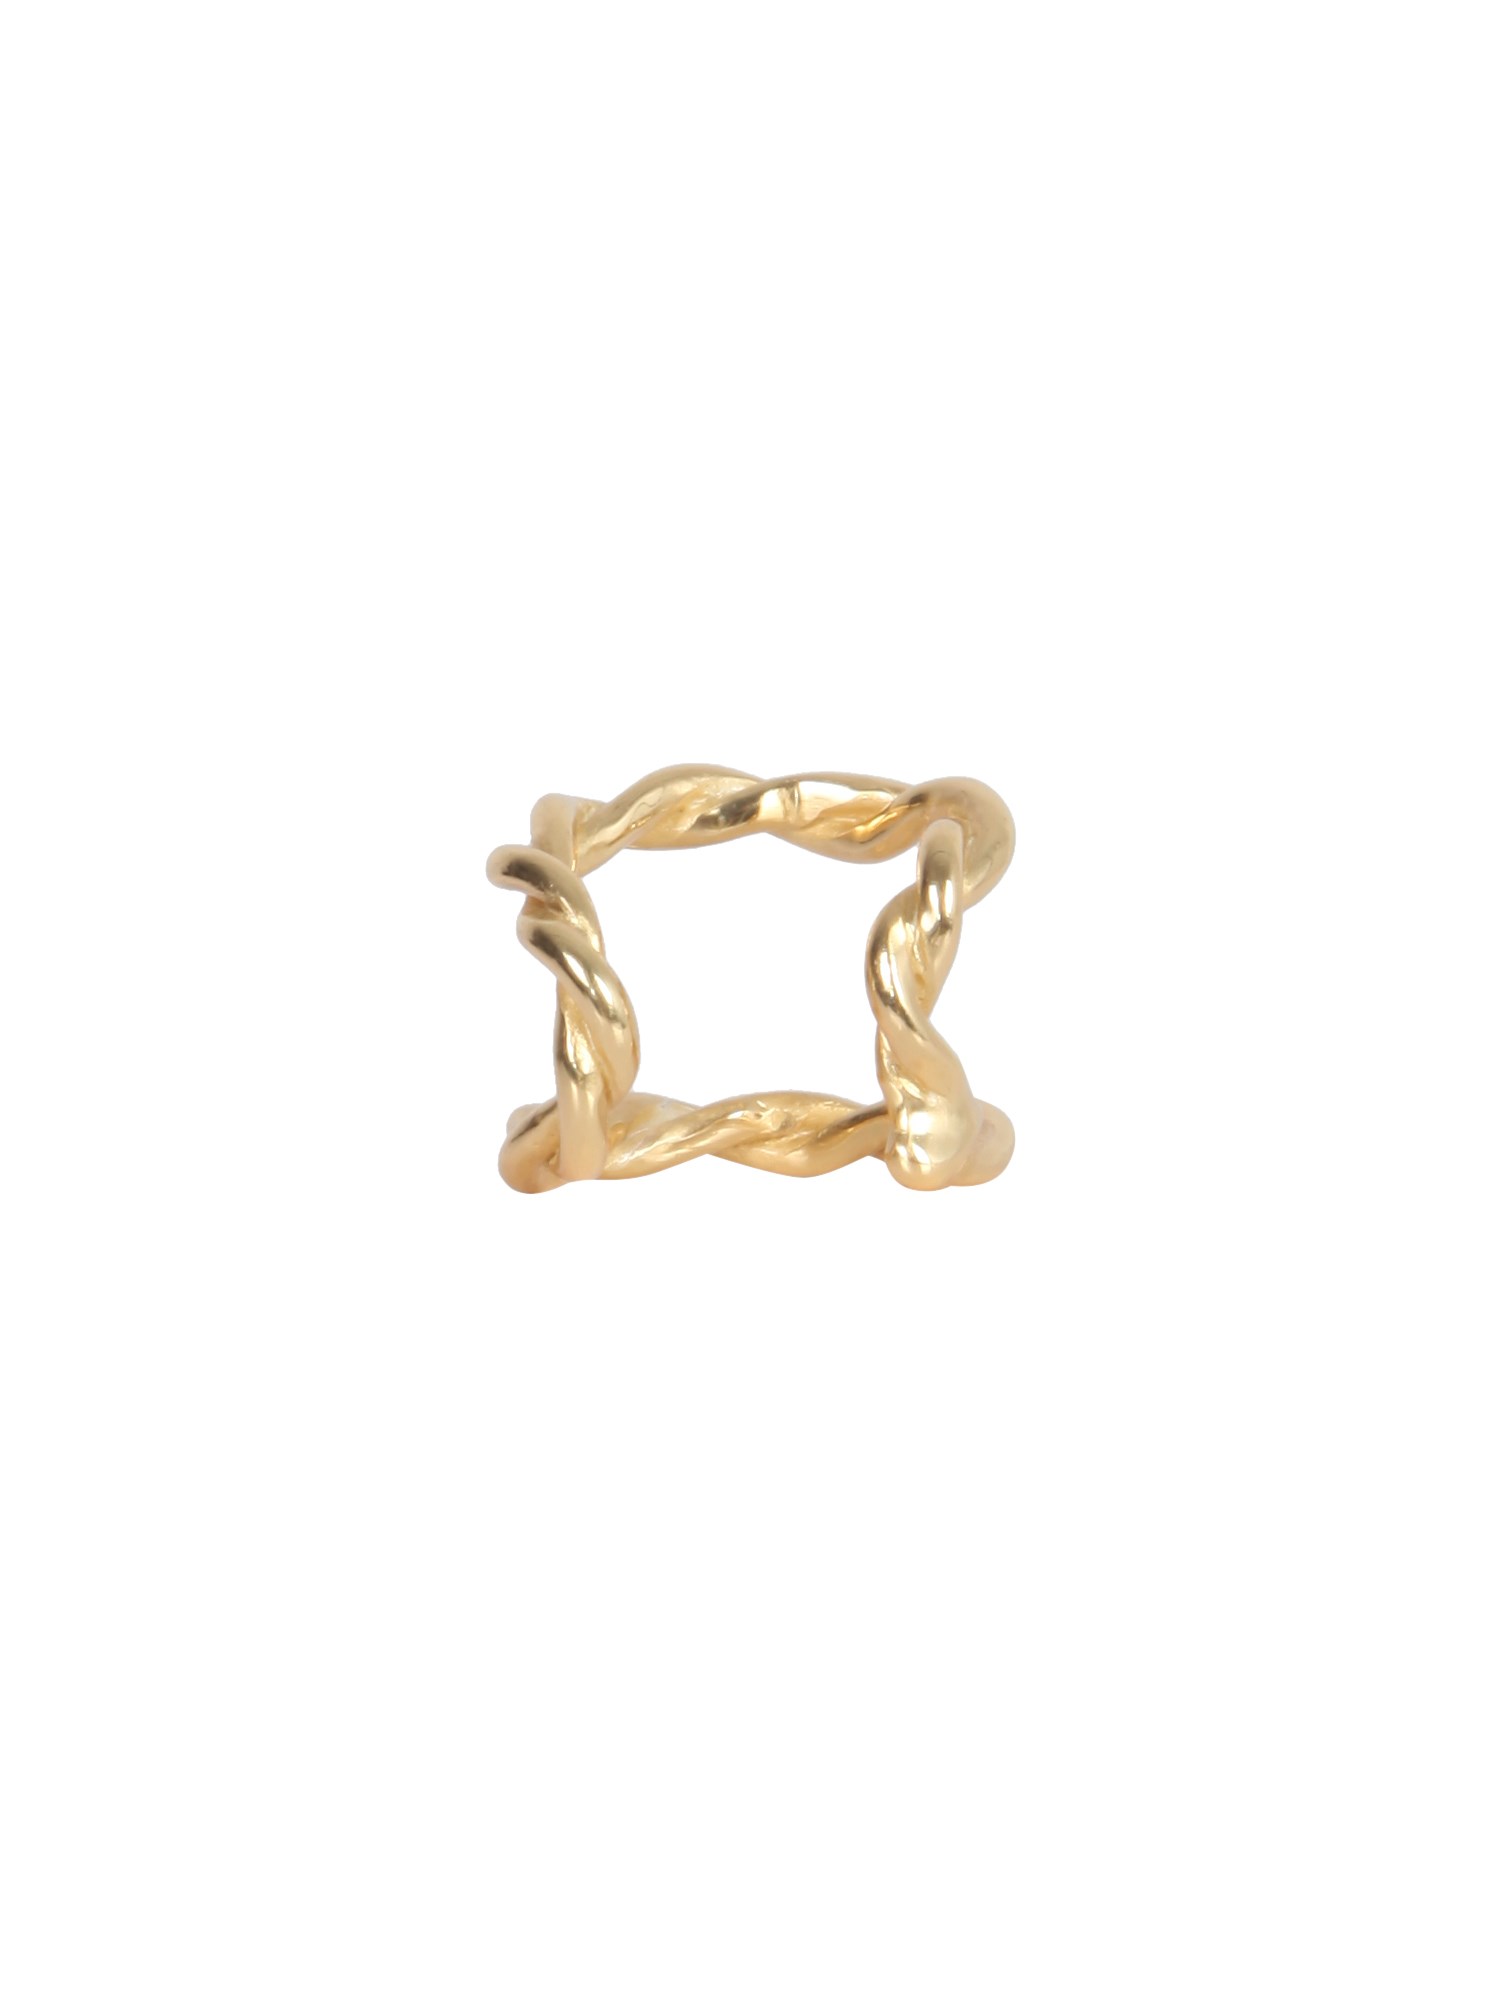 ilaria ludovici jewelry hold me ring